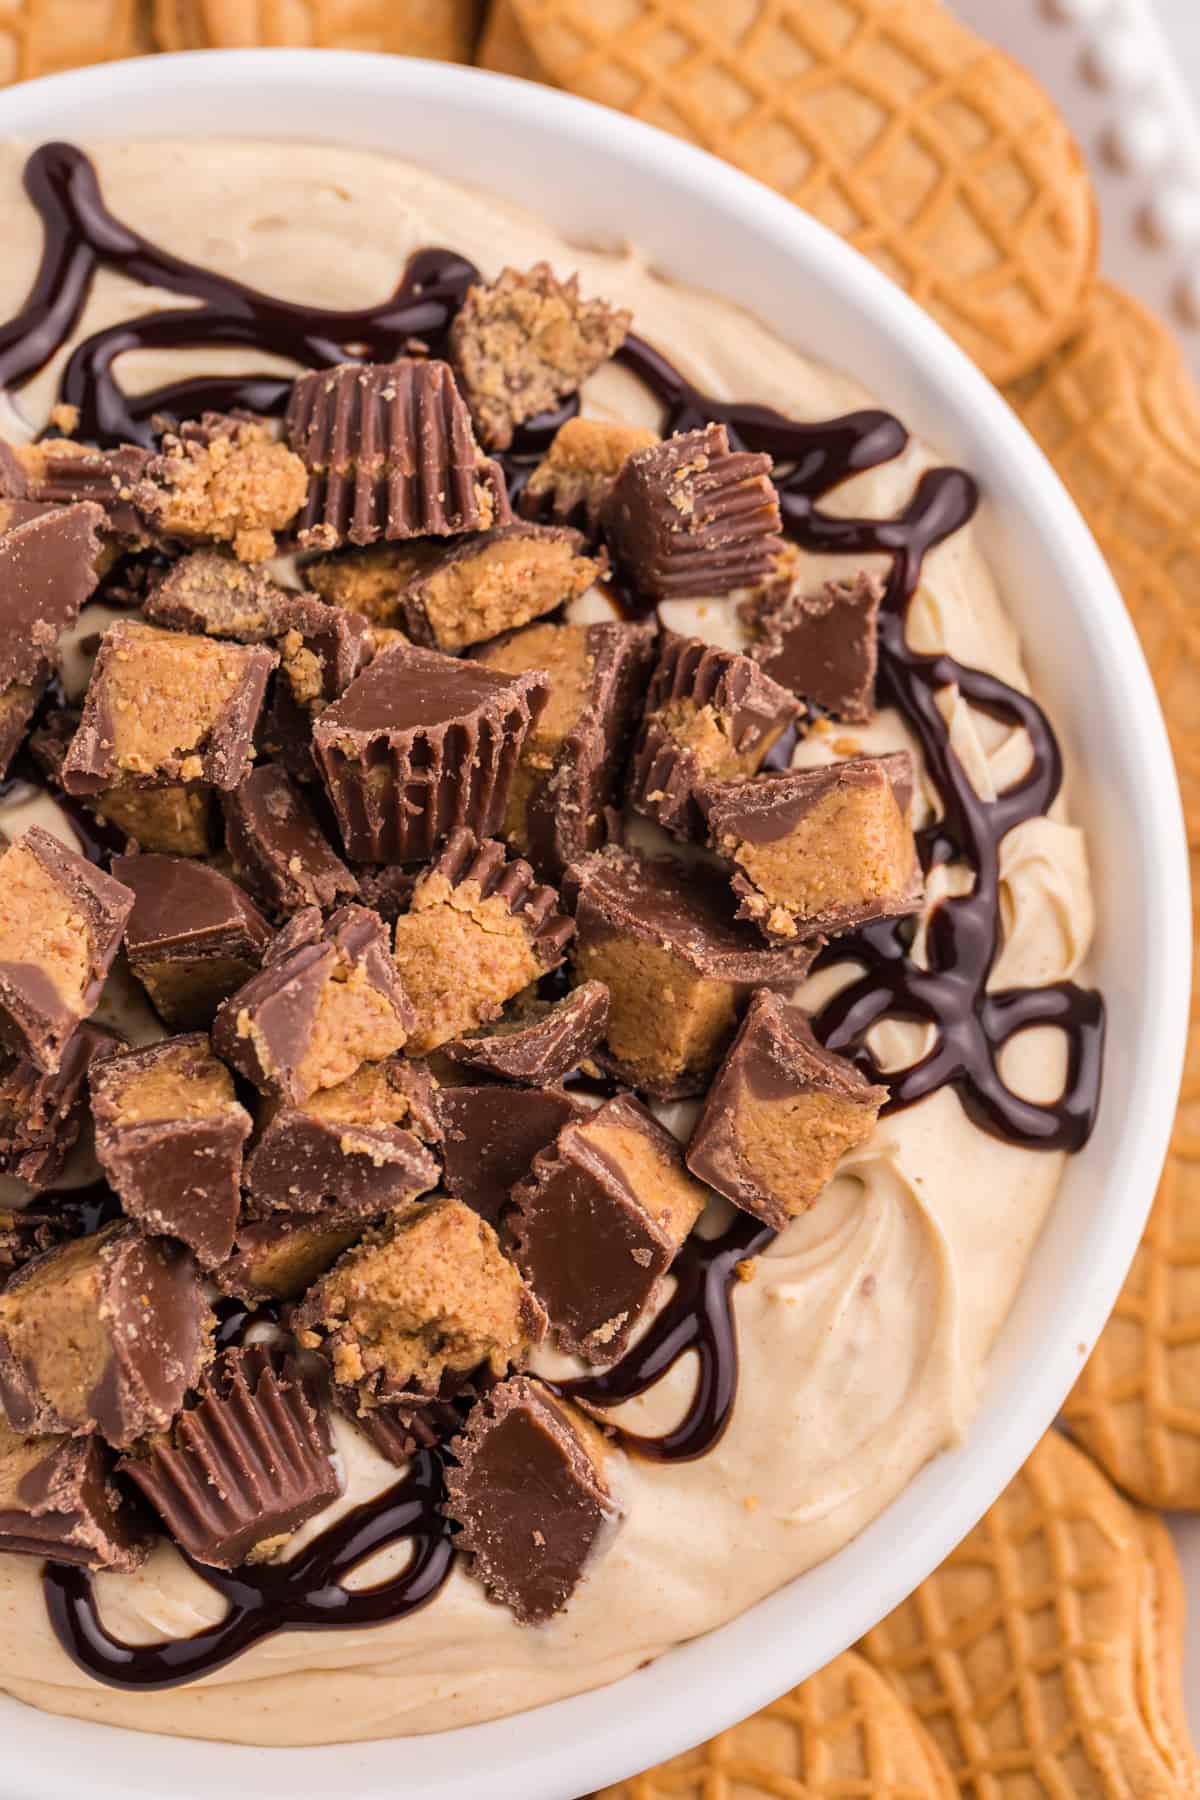 Reese's Peanut Butter Cup Cheesecake Dip with peanut butter cookies for dipping.